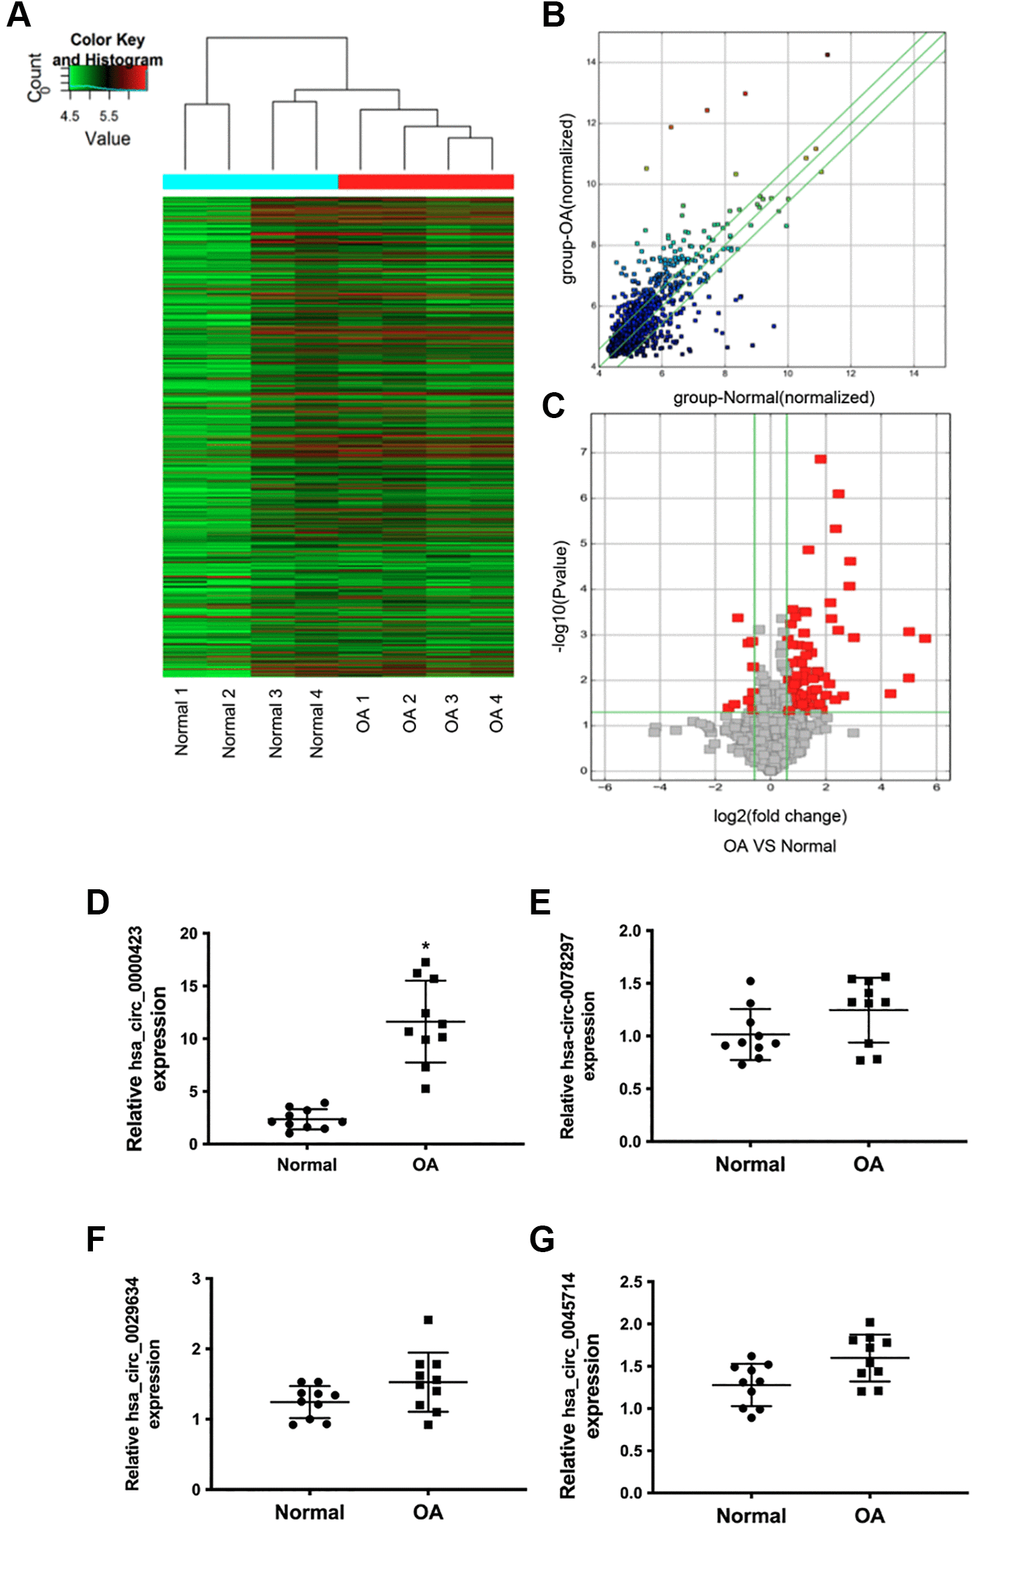 Differential expression of circRNAs in normal and OA specimens. (A) Hierarchical clustering analysis of the differentially expressed circRNAs between 4 individuals normal and 4 individuals OA specimens; (B) Scatter plot of circRNAs expression between normal and OA specimens. The circRNAs below the bottom green line and above the top green line illustrate >2.0-fold changes between the normal and OA specimens. (C) Volcano plots of the differentially expressed circRNAs. The red point in the plot represents the differentially down or up-regulated circRNAs with statistical significance. (D–G) Expression of significant circRNAs in normal and OA specimens.